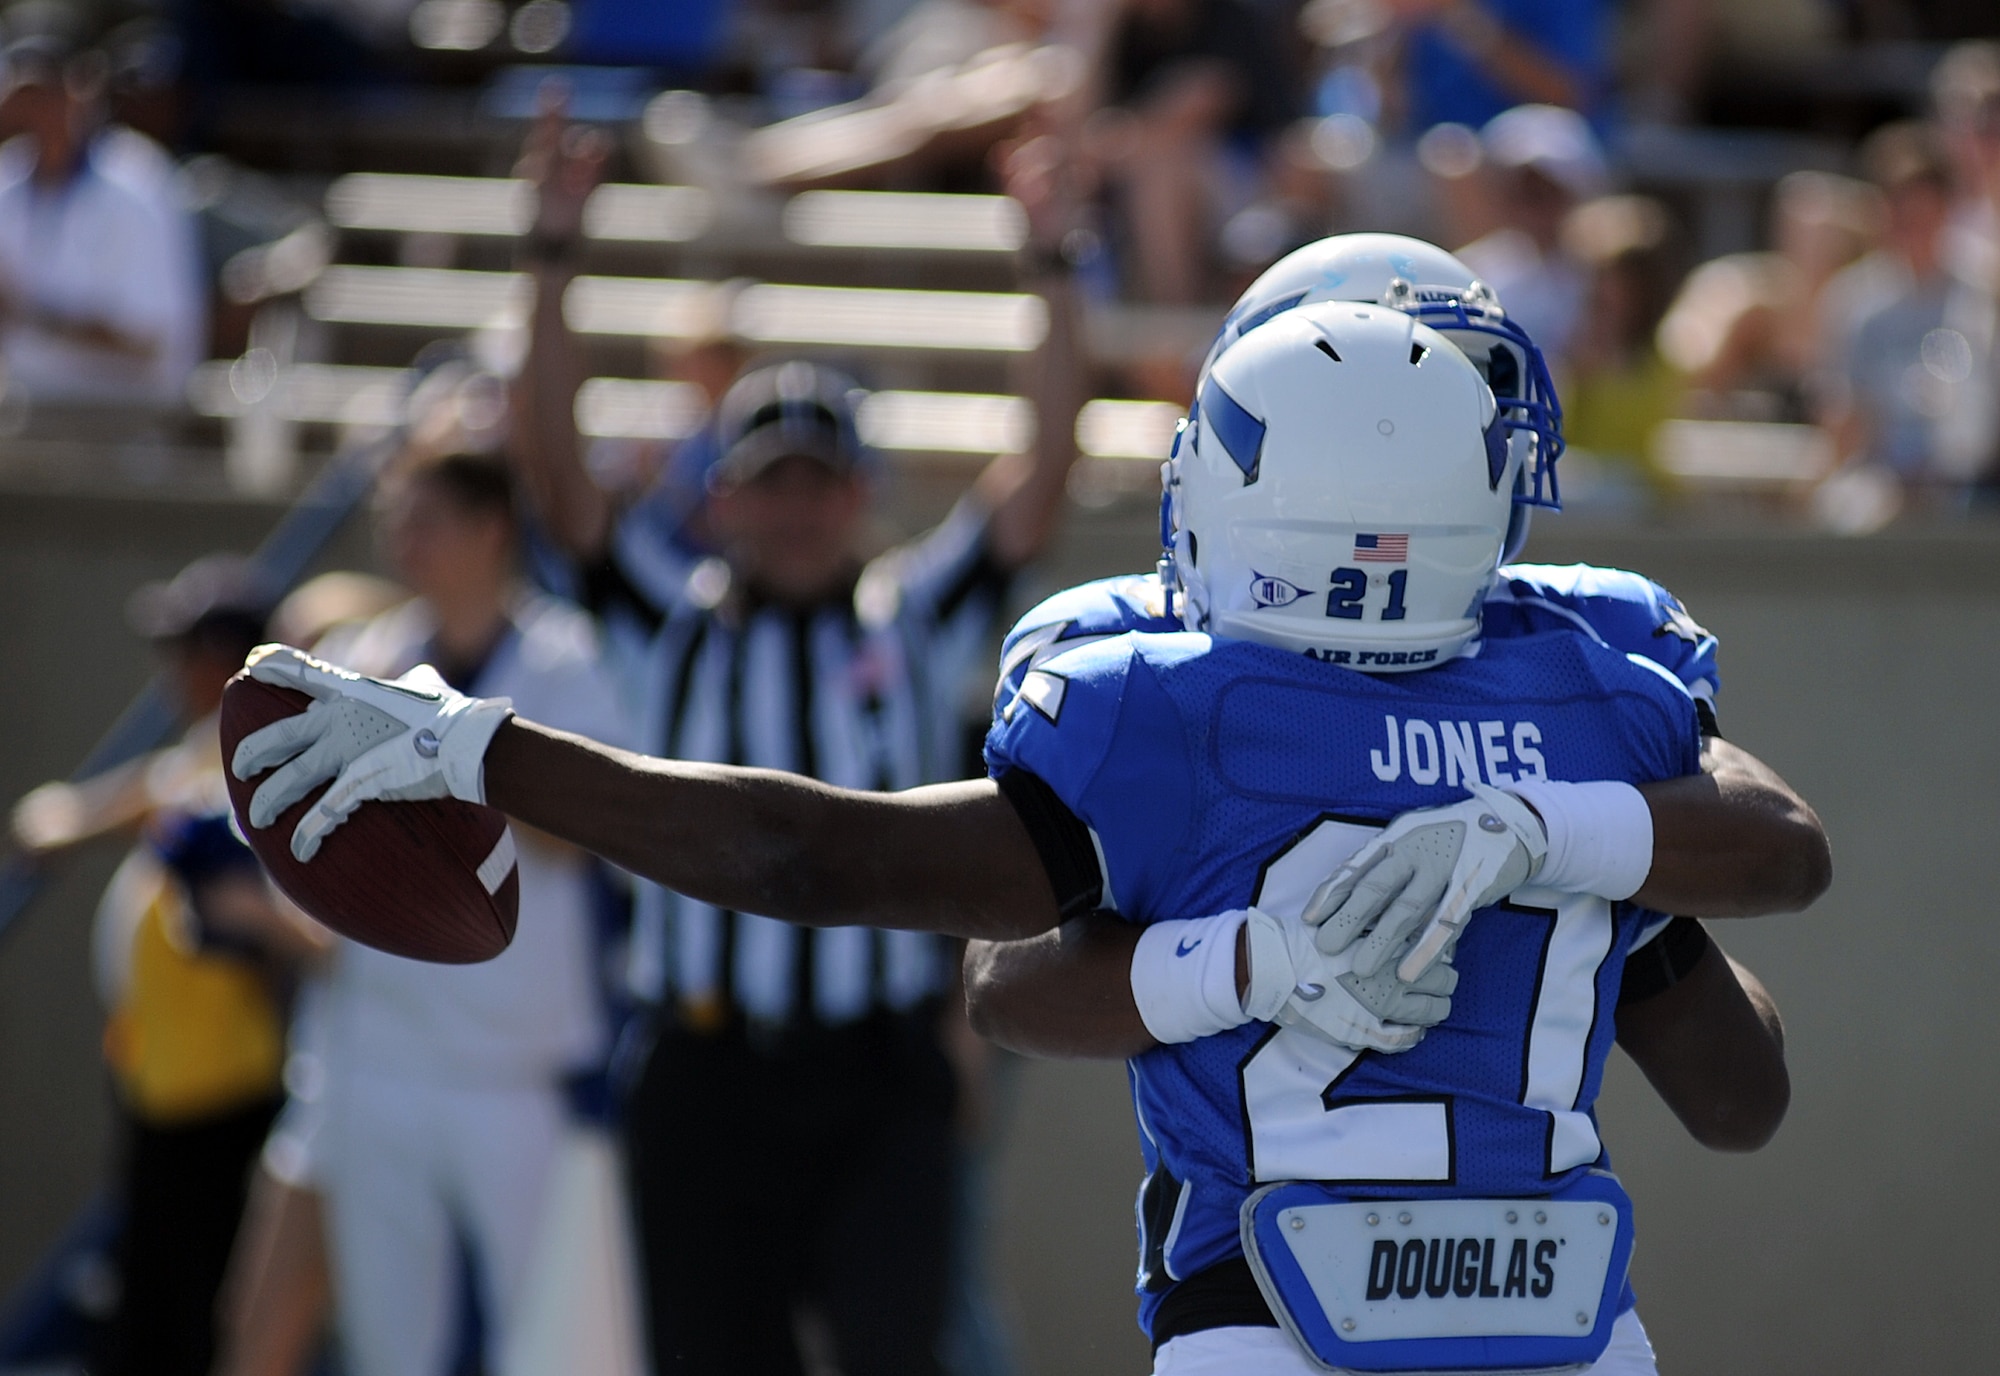 Air Force running back Darius Jones celebrates following his 23-yard touchdown run Saturday, Sept. 24, 2011 at Falcon Stadium. Jones finished with 63 yards on six carries to go along with the Falcons' 792 yards of total offense on the day, a school and Mountain West record. They beat the Tigers 63-24. (U.S. Air Force photo/Tech. Sgt. Raymond Hoy)